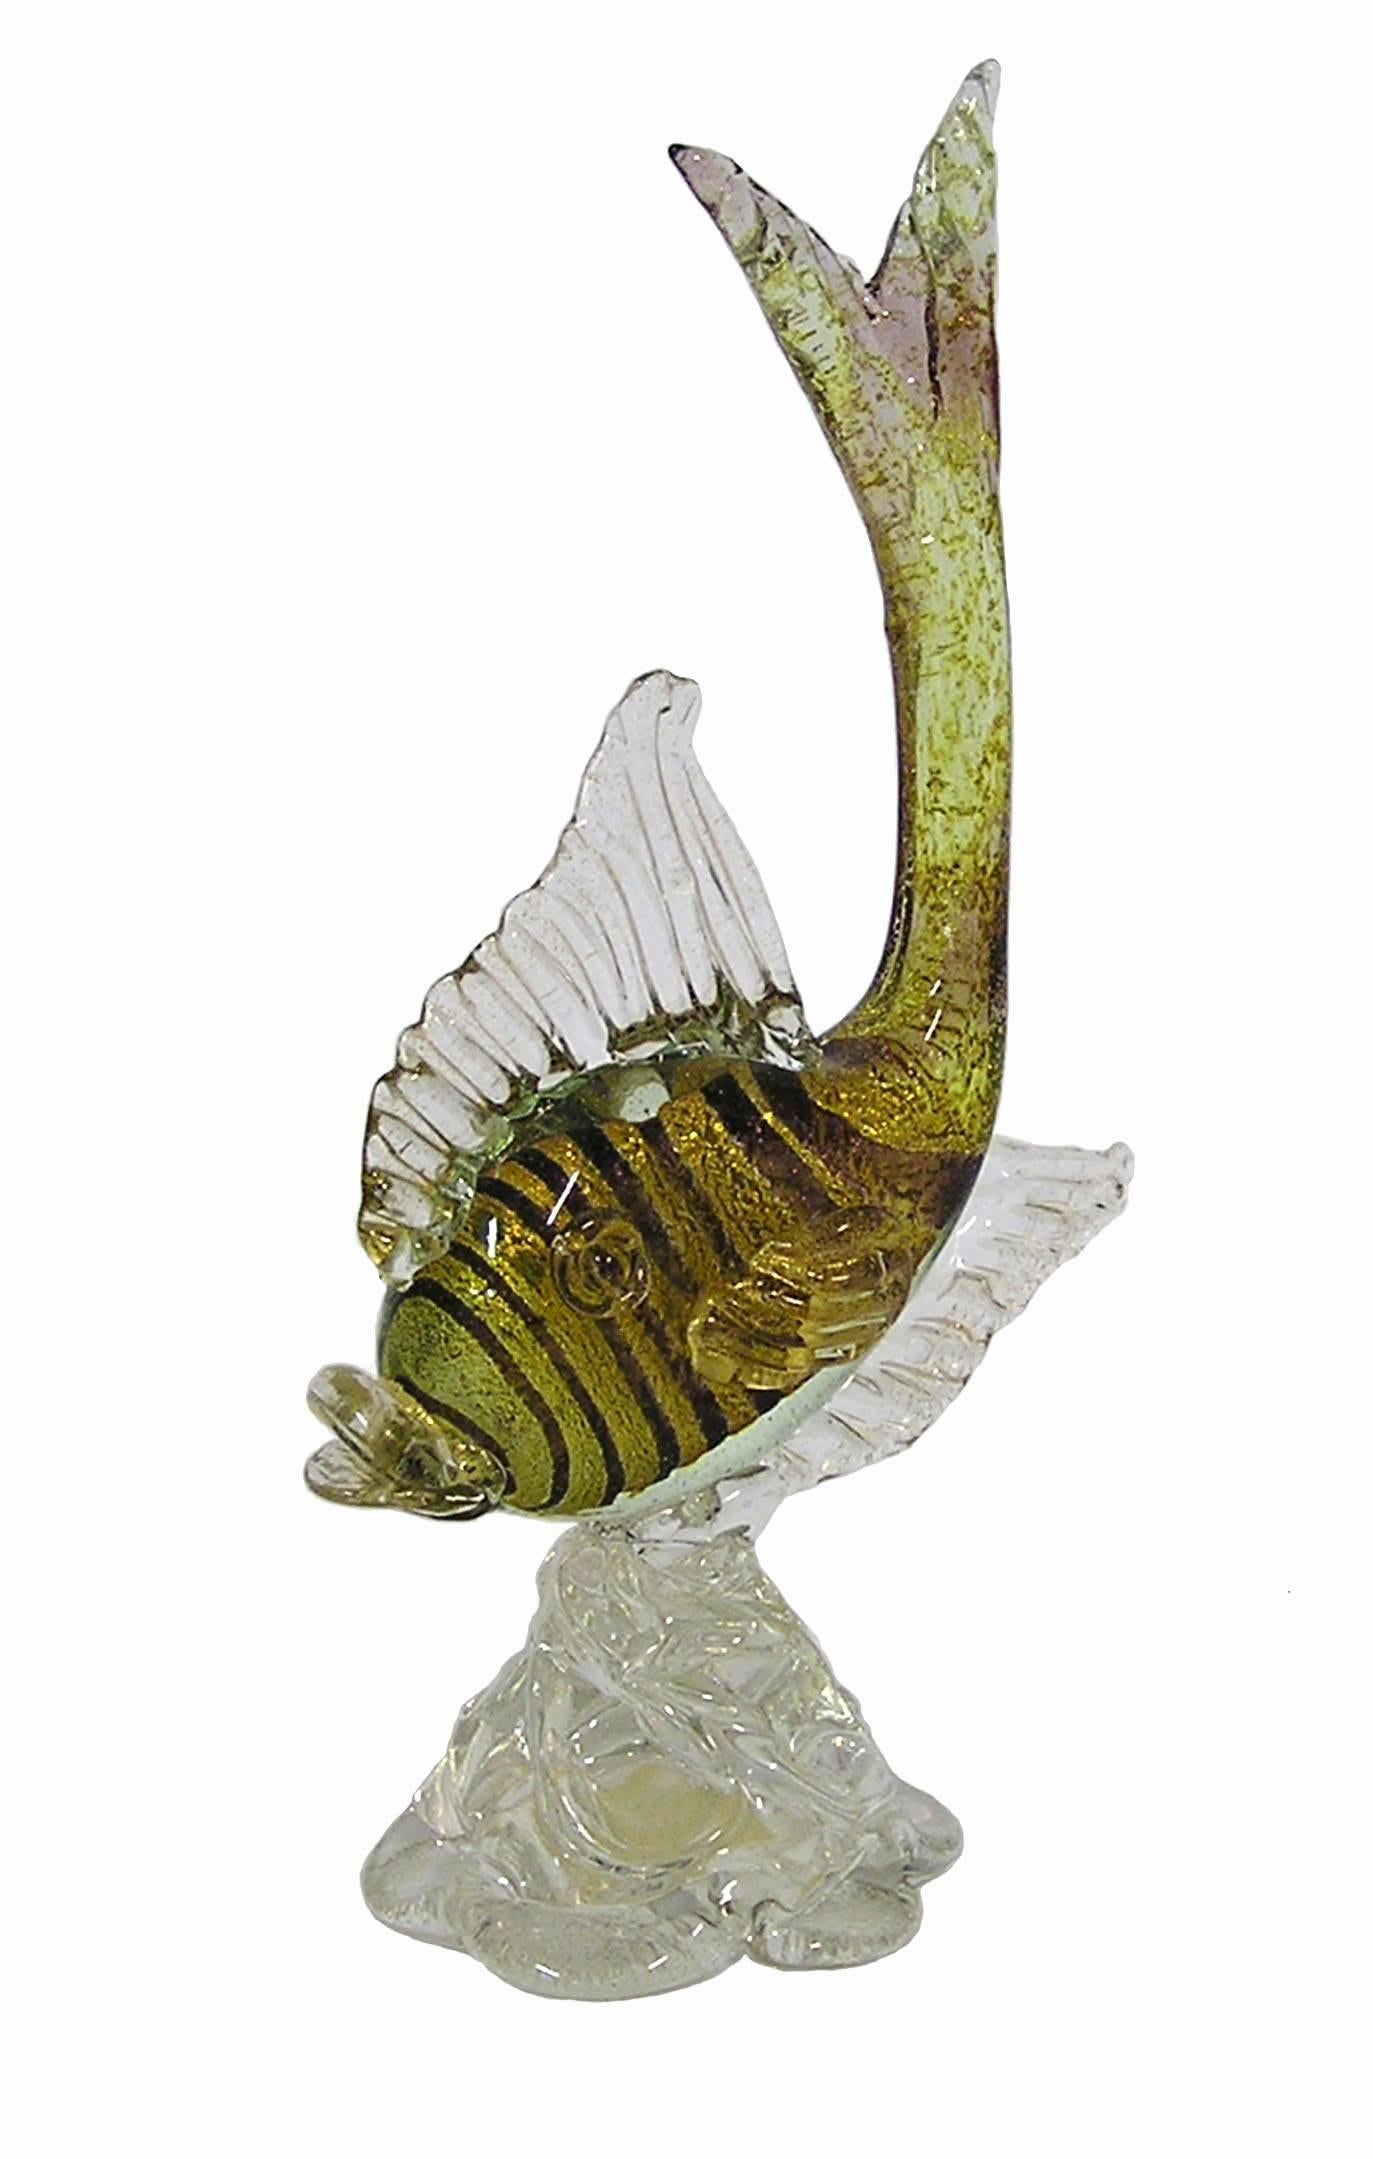 A stunning pair of handblown Italian art glass Sommerso fish sculptures from the 1950s-1960s. Made in Murano Italy and labelled 